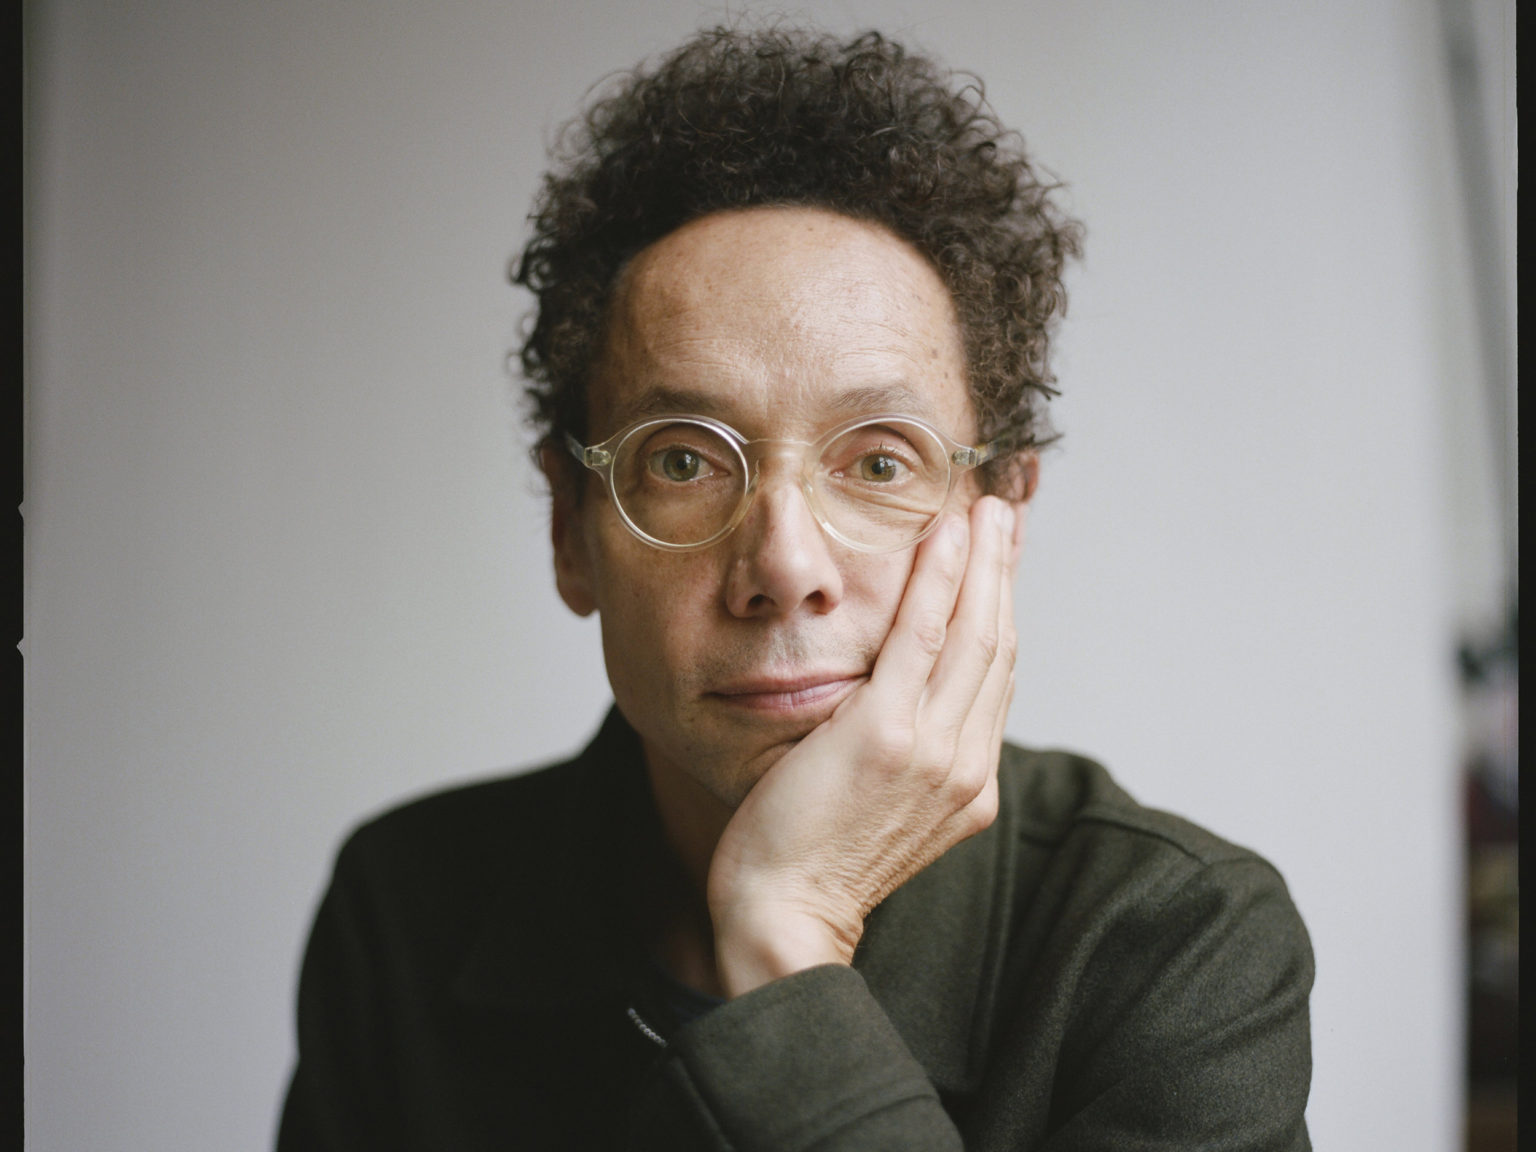 Celebrated storyteller Malcom Gladwell takes listeners behind the scenes at Lexus in a new podcast.